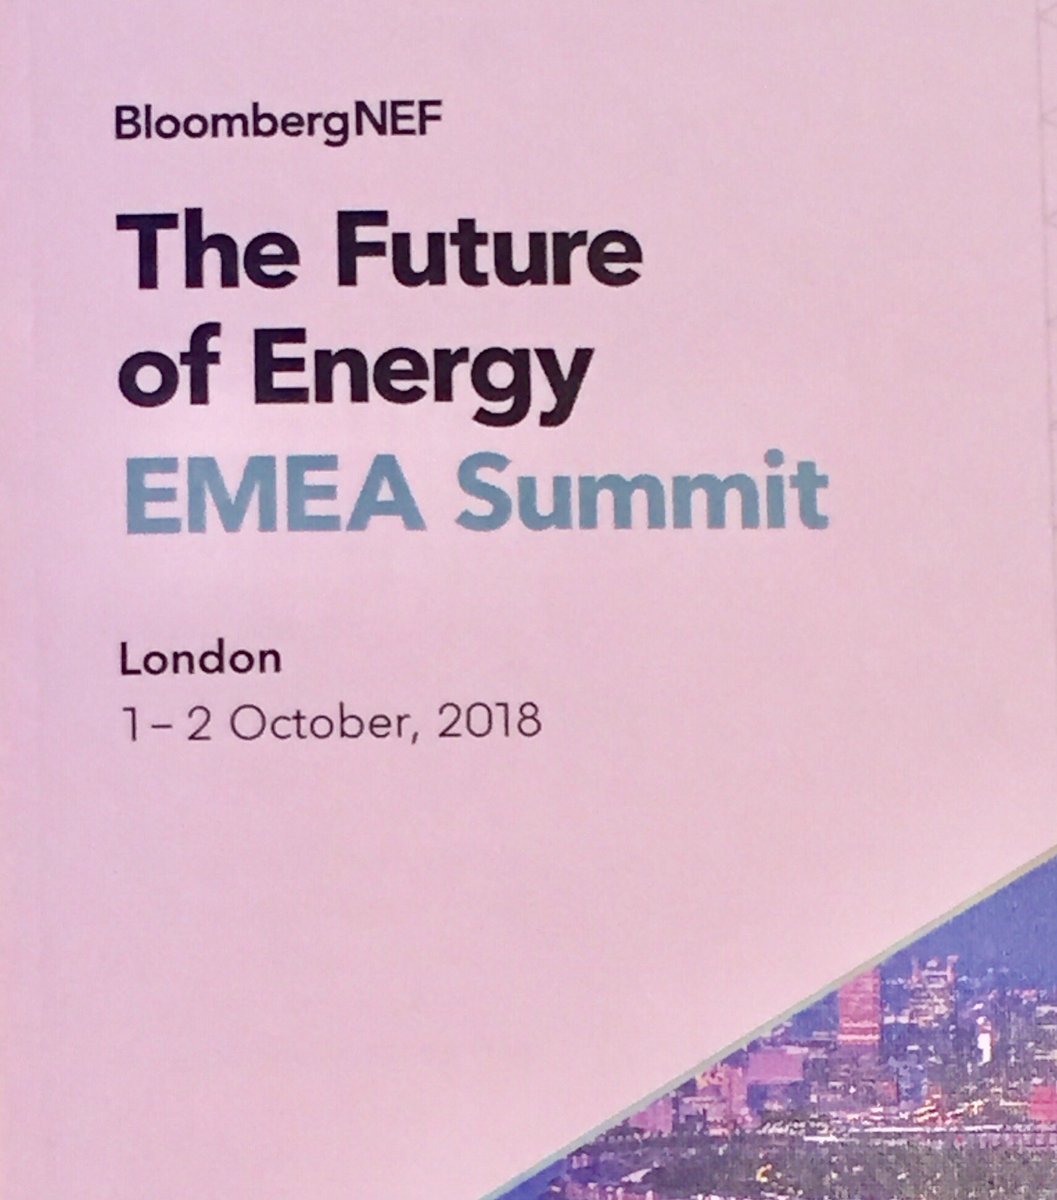 .@iberdrola expecting €600m additional revenue by 2022 thanks to digitalisation processes! Investments in #digitalisation #IoT paid back in 5 years. Huge benefits expected | end-users in control | energy transition enabled by #BigData | inspiring speech today #BNEFSummit #tw4SE